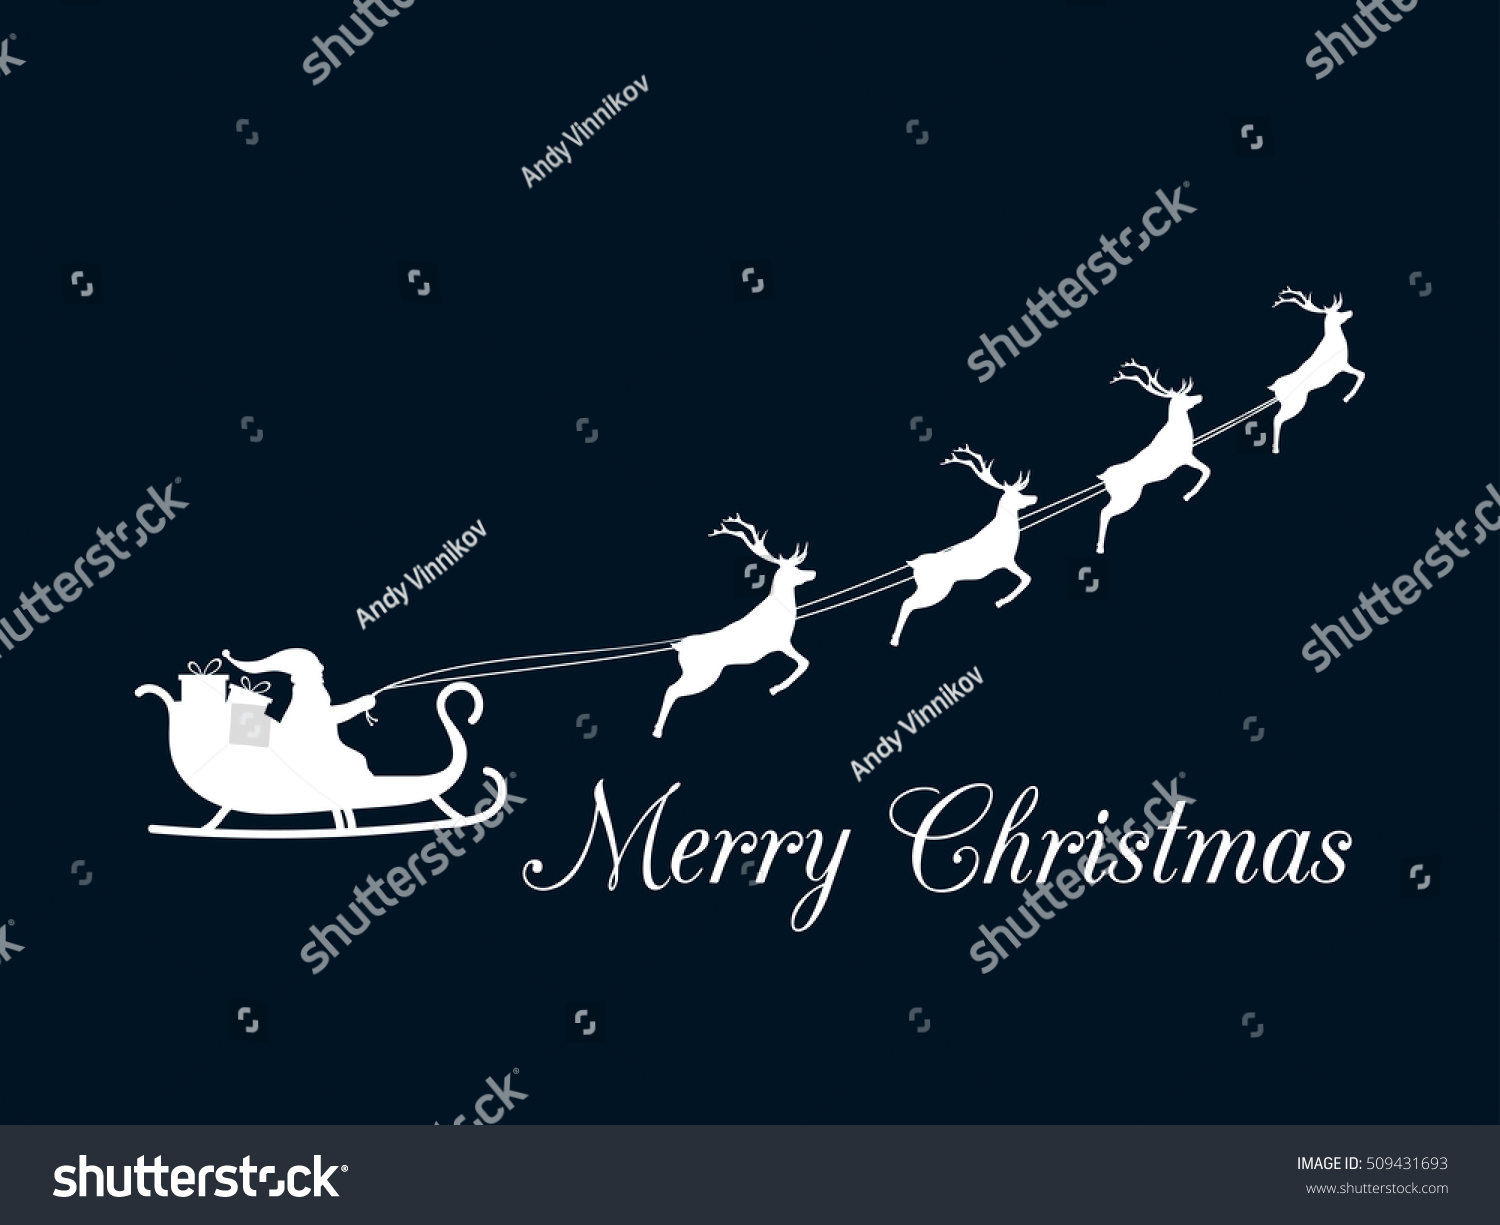 Santa Claus Is Flying In A Sleigh With Reindeer. Merry Christmas ...